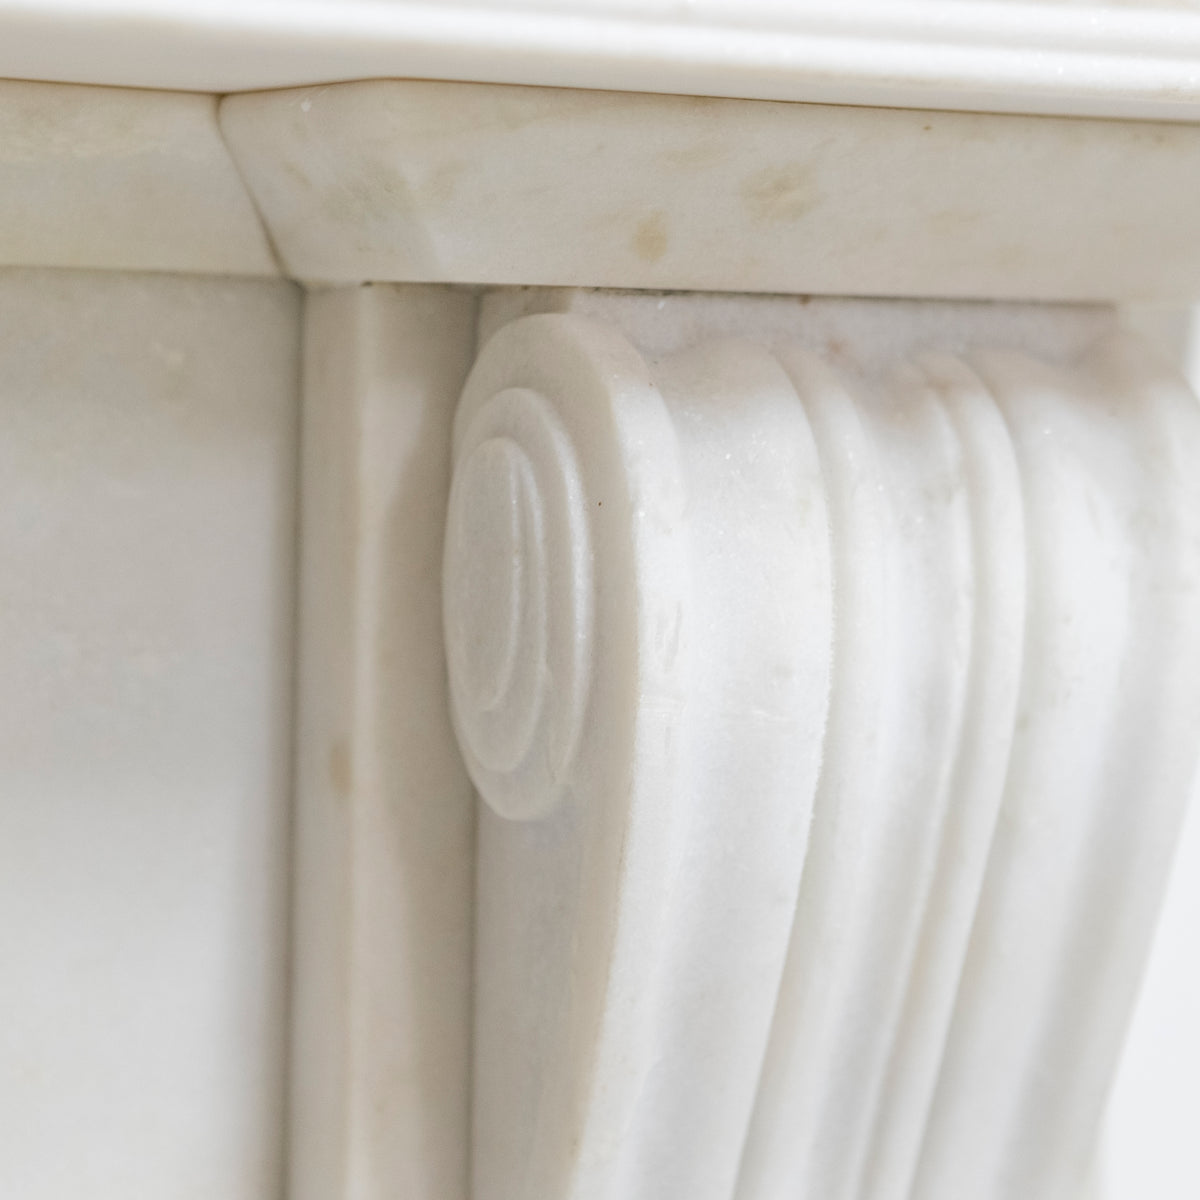 Reclaimed Statuary Marble Victorian Style Chimneypiece with Corbels | The Architectural Forum